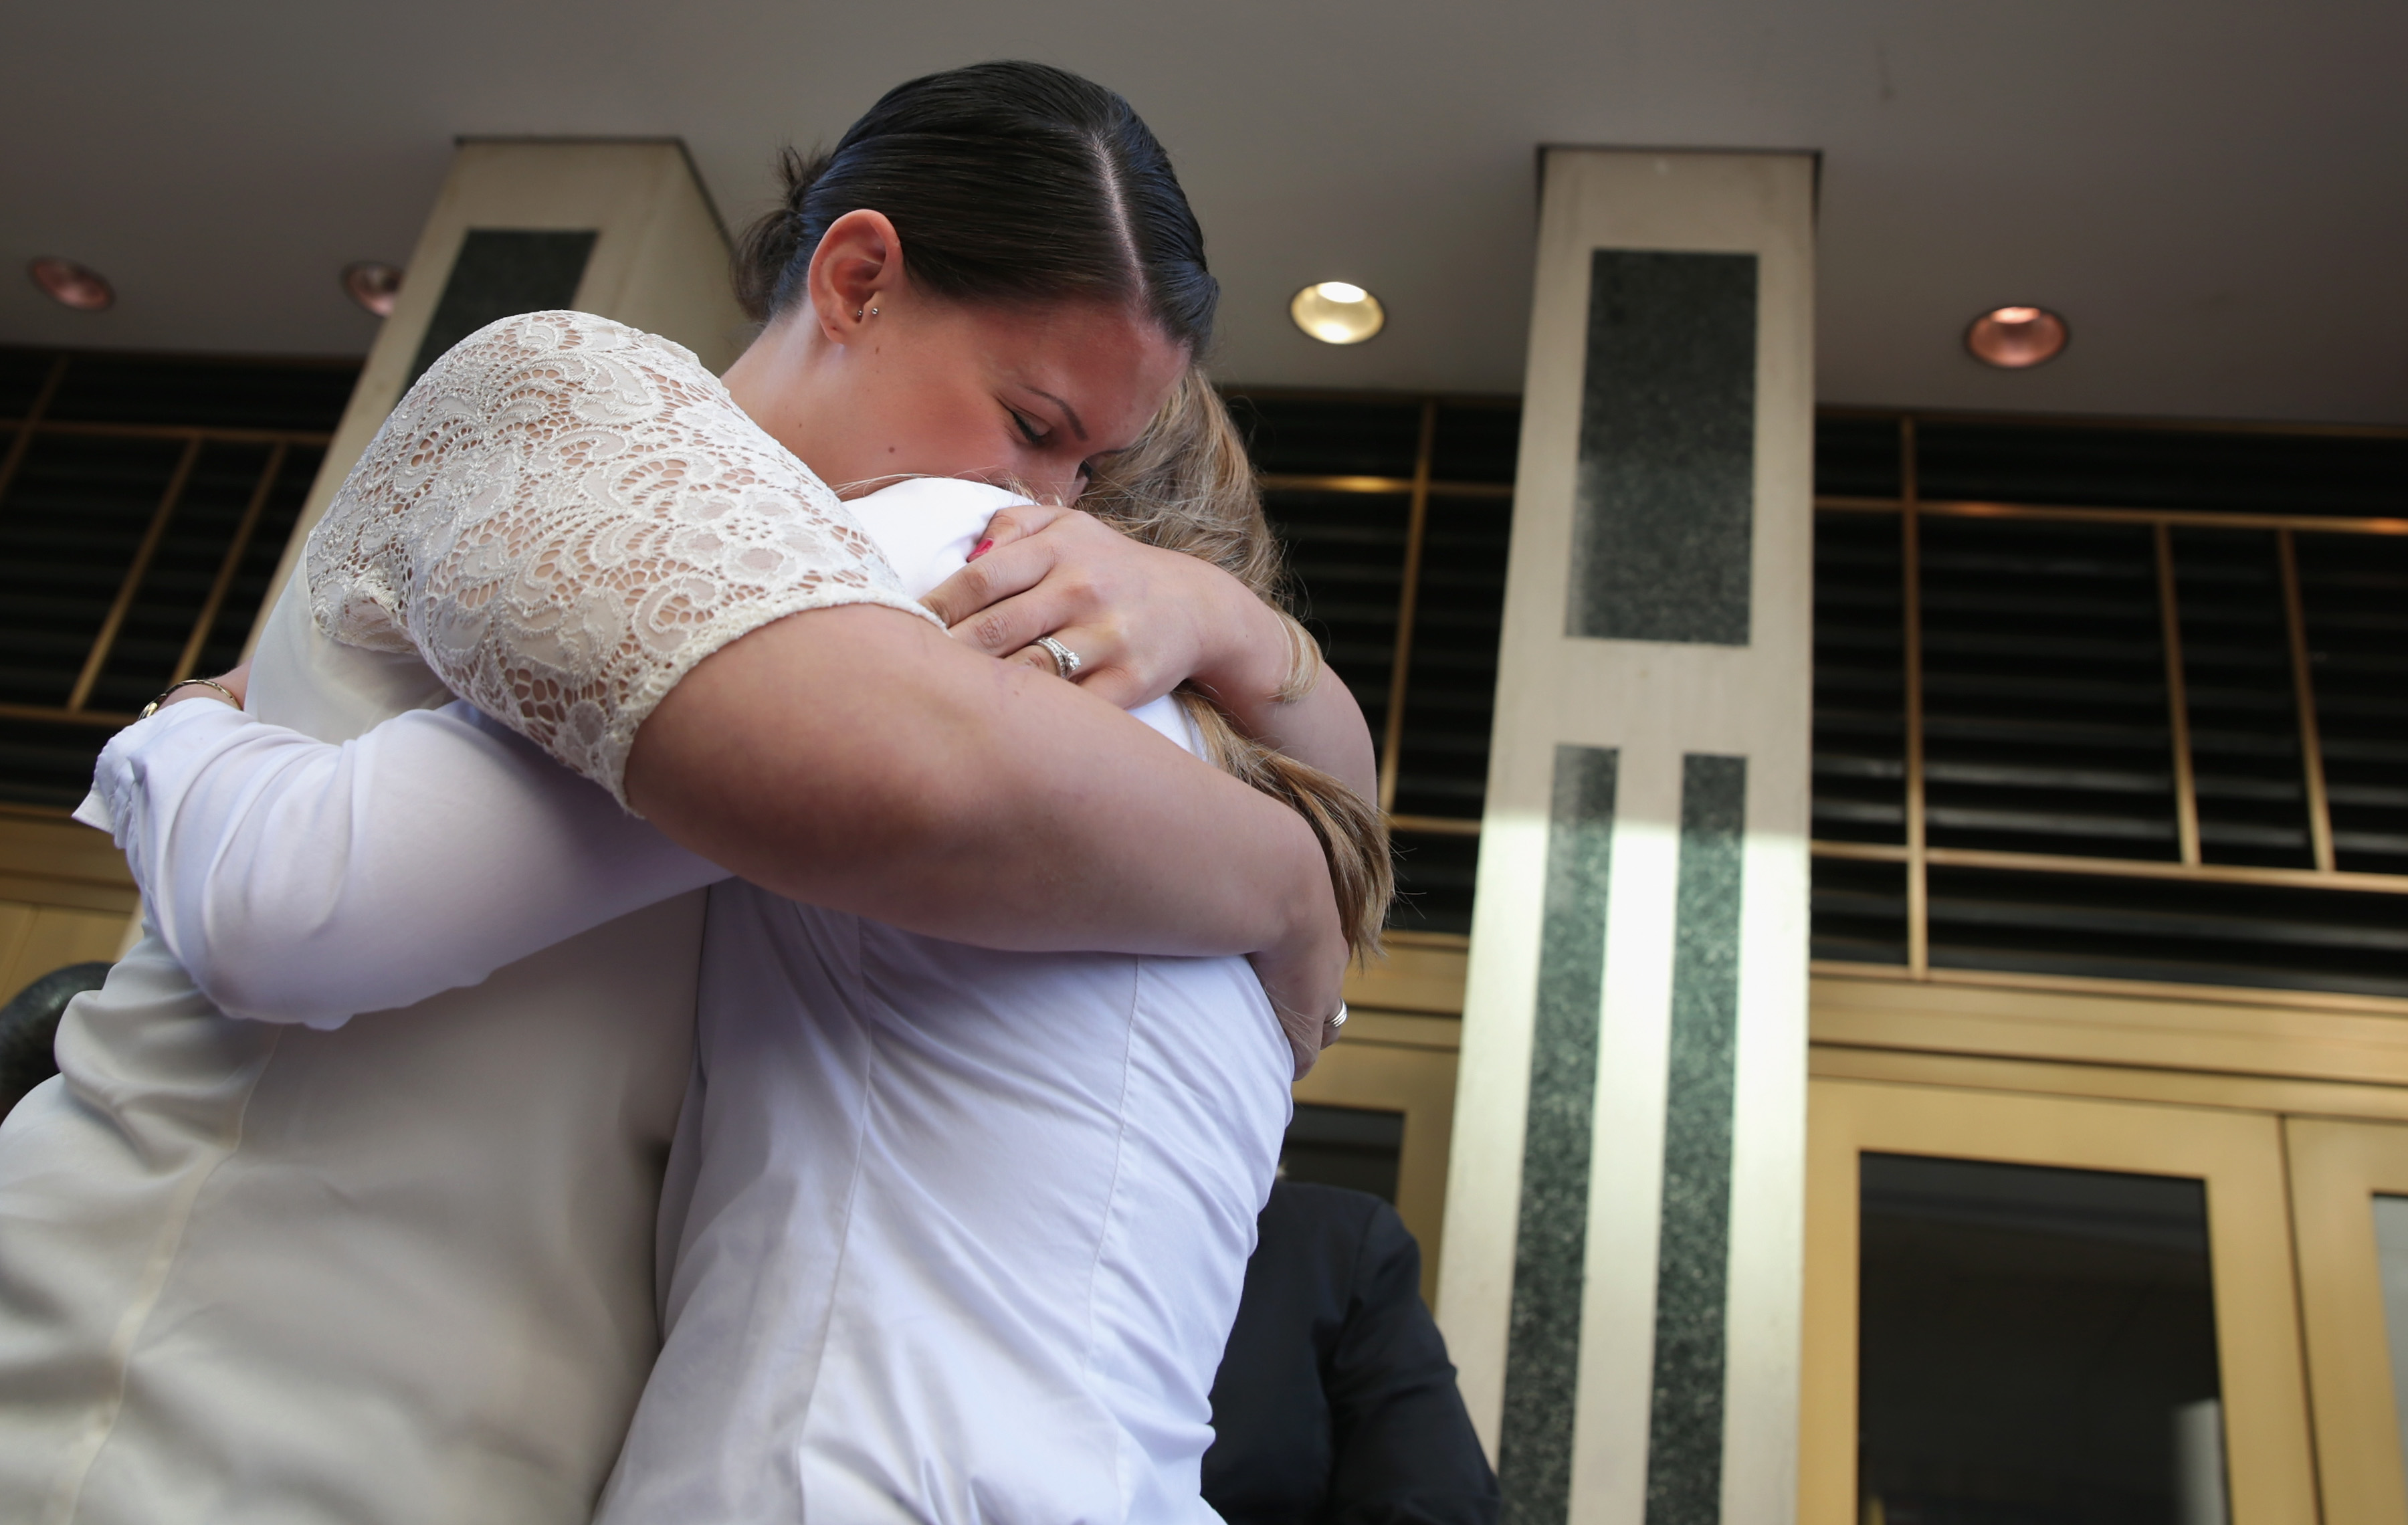 Erika Turner and Jennifer Melsop of Centreville, Virginia, embrace each other after they became the first same sex marriage couple in Arlington County at the Arlington County Courthouse on Oct. 6, 2014 in Arlington, Virginia.